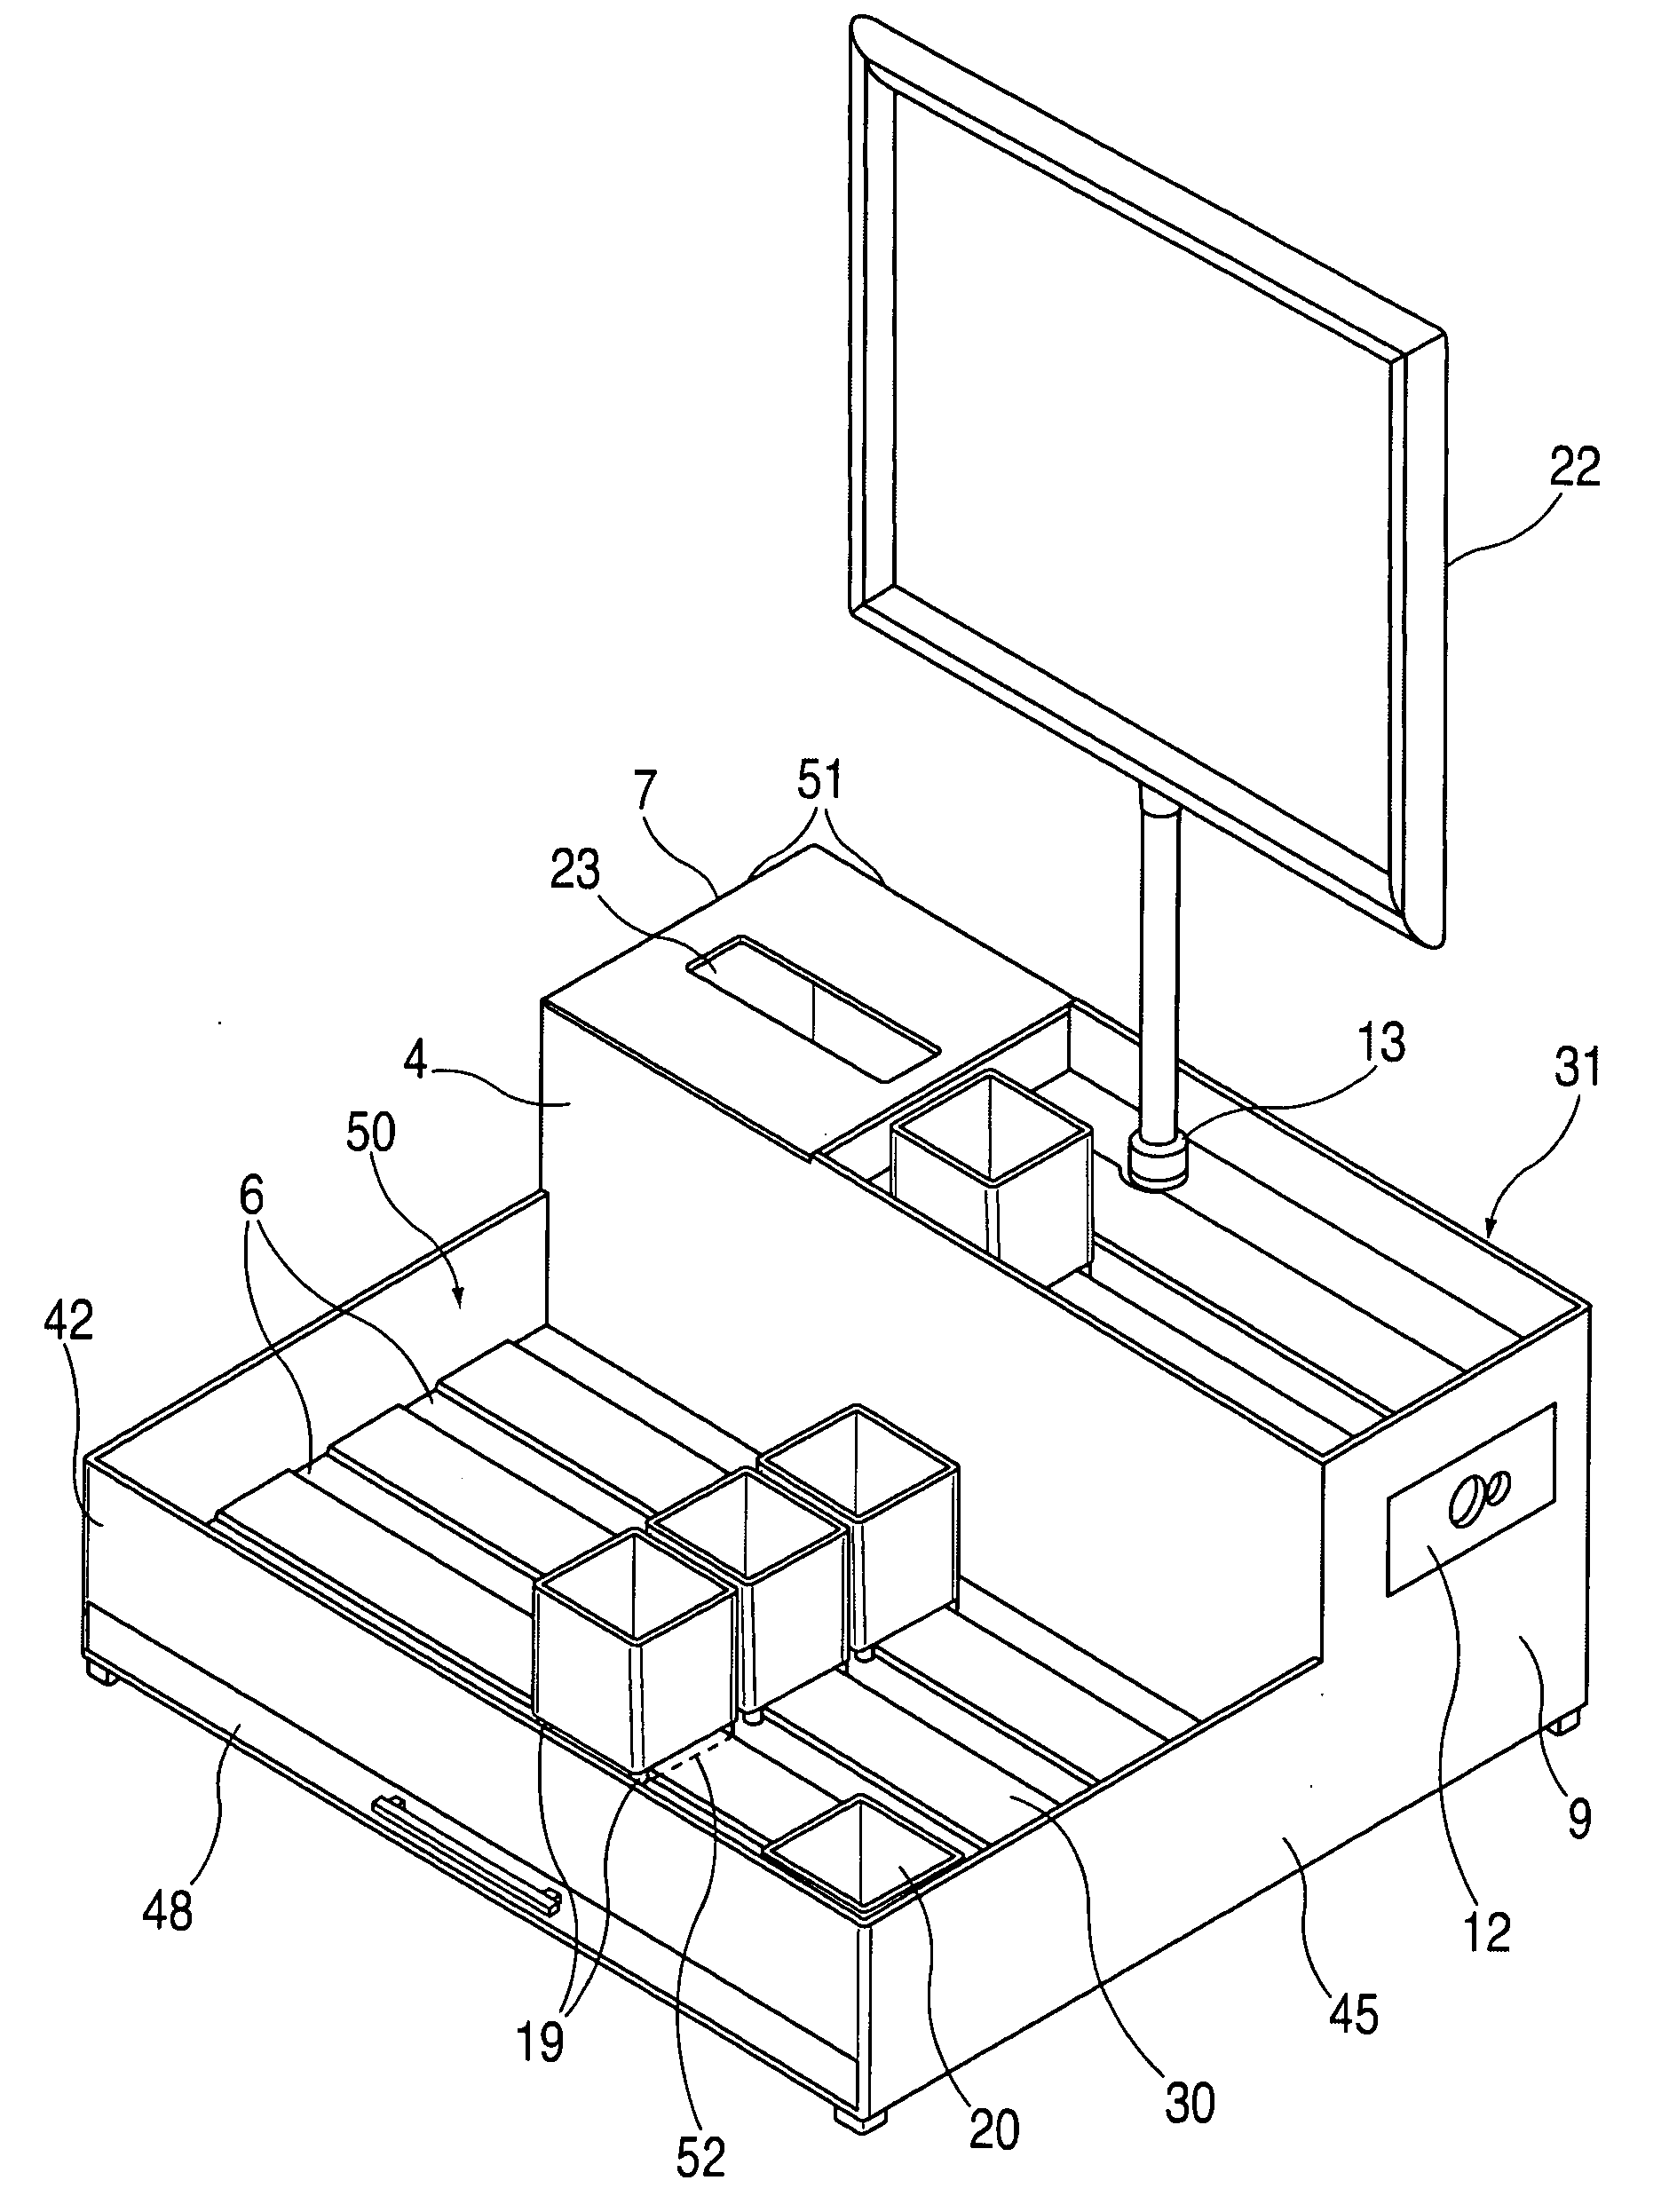 Cosmetic organizer and storage system